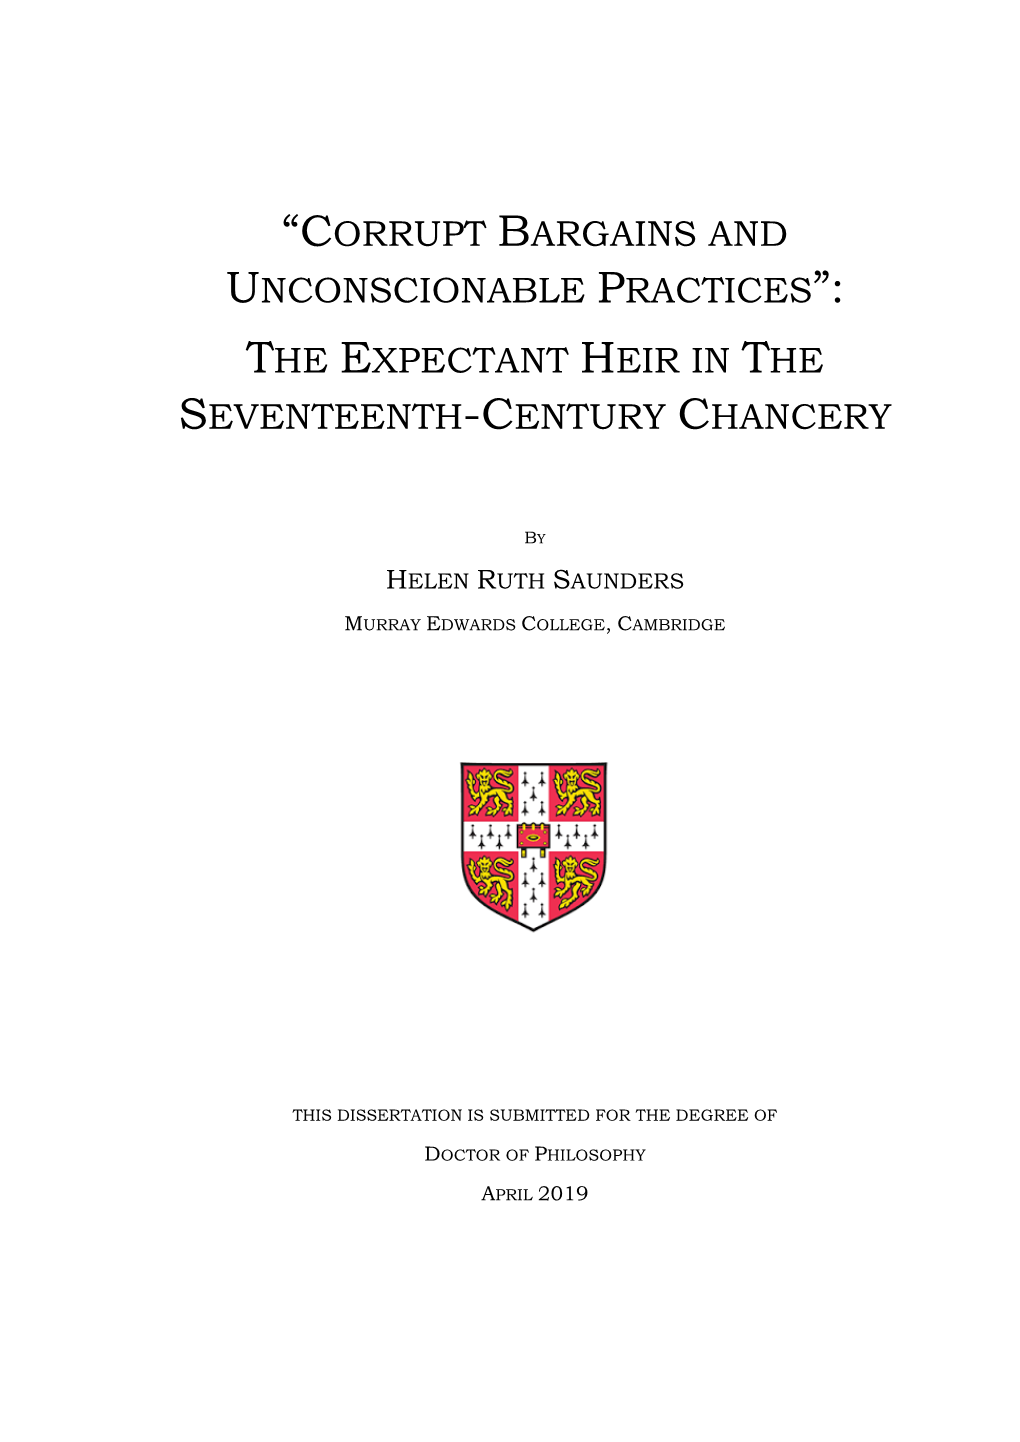 “Corrupt Bargains and Unconscionable Practices”: the Expectant Heir in the Seventeenth-Century Chancery